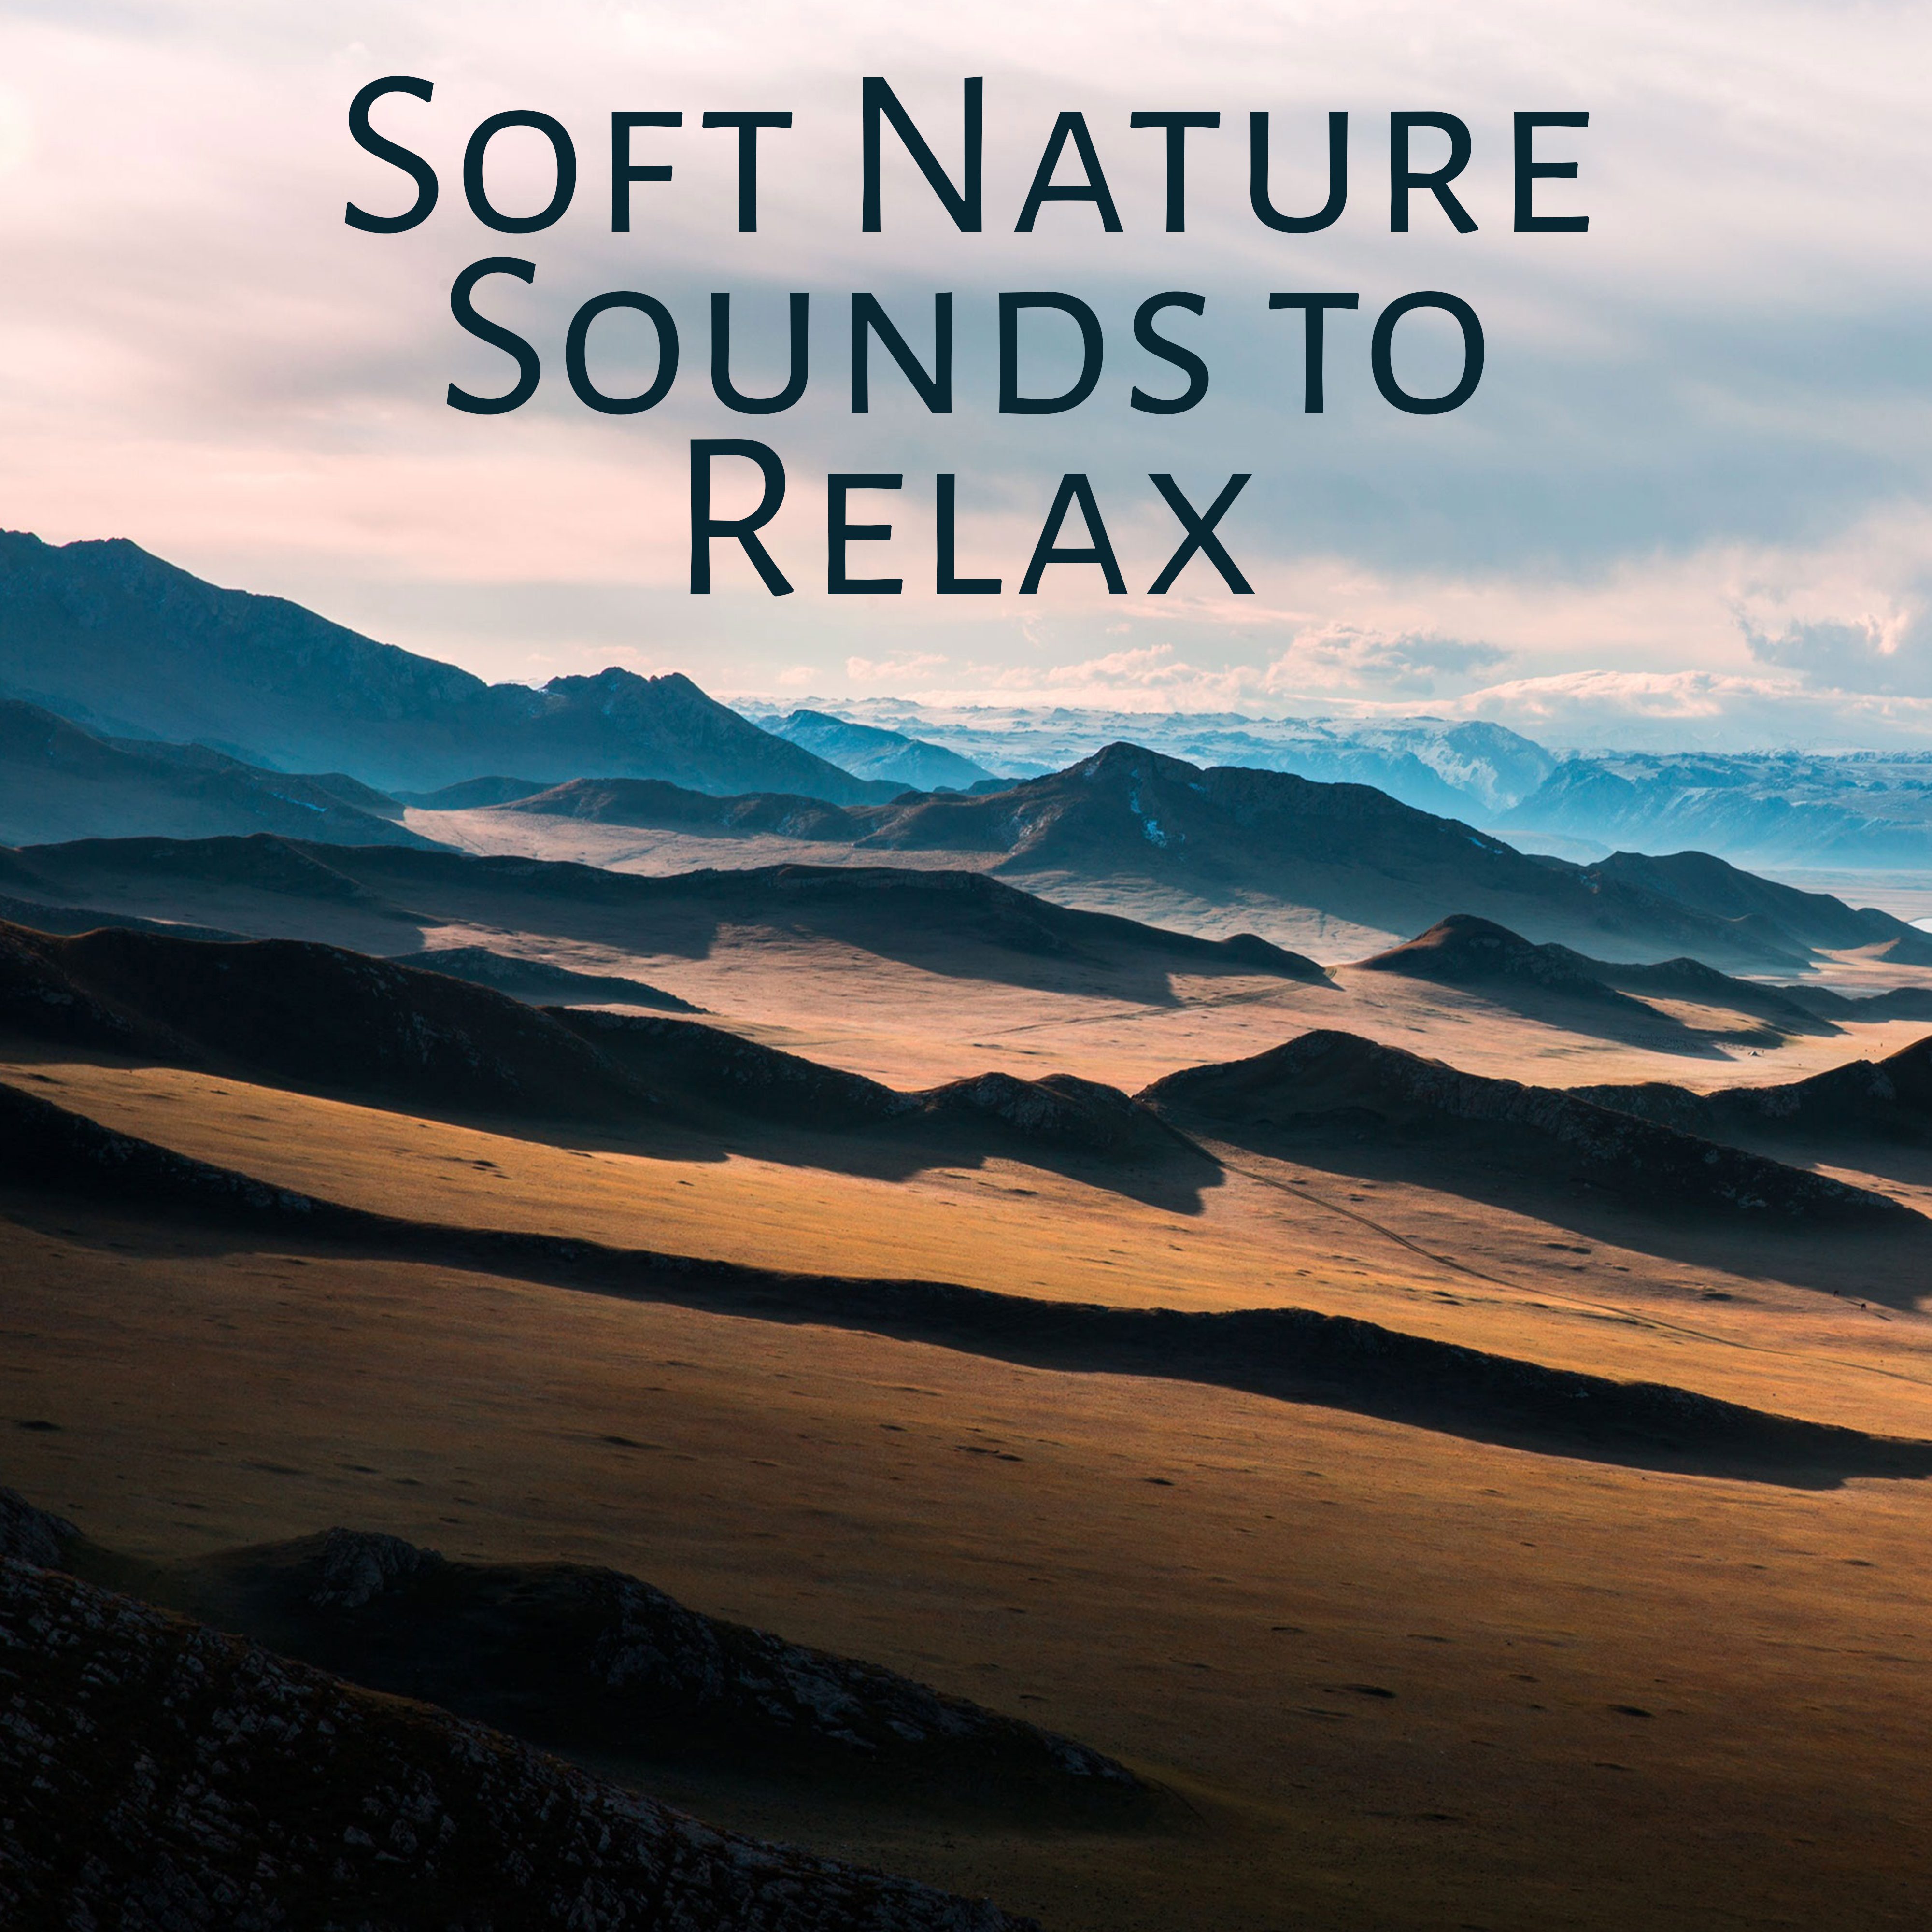 Soft Nature Sounds to Relax – Calming Nature Waves, Healing Melodies, Music to Rest, Inner Harmony